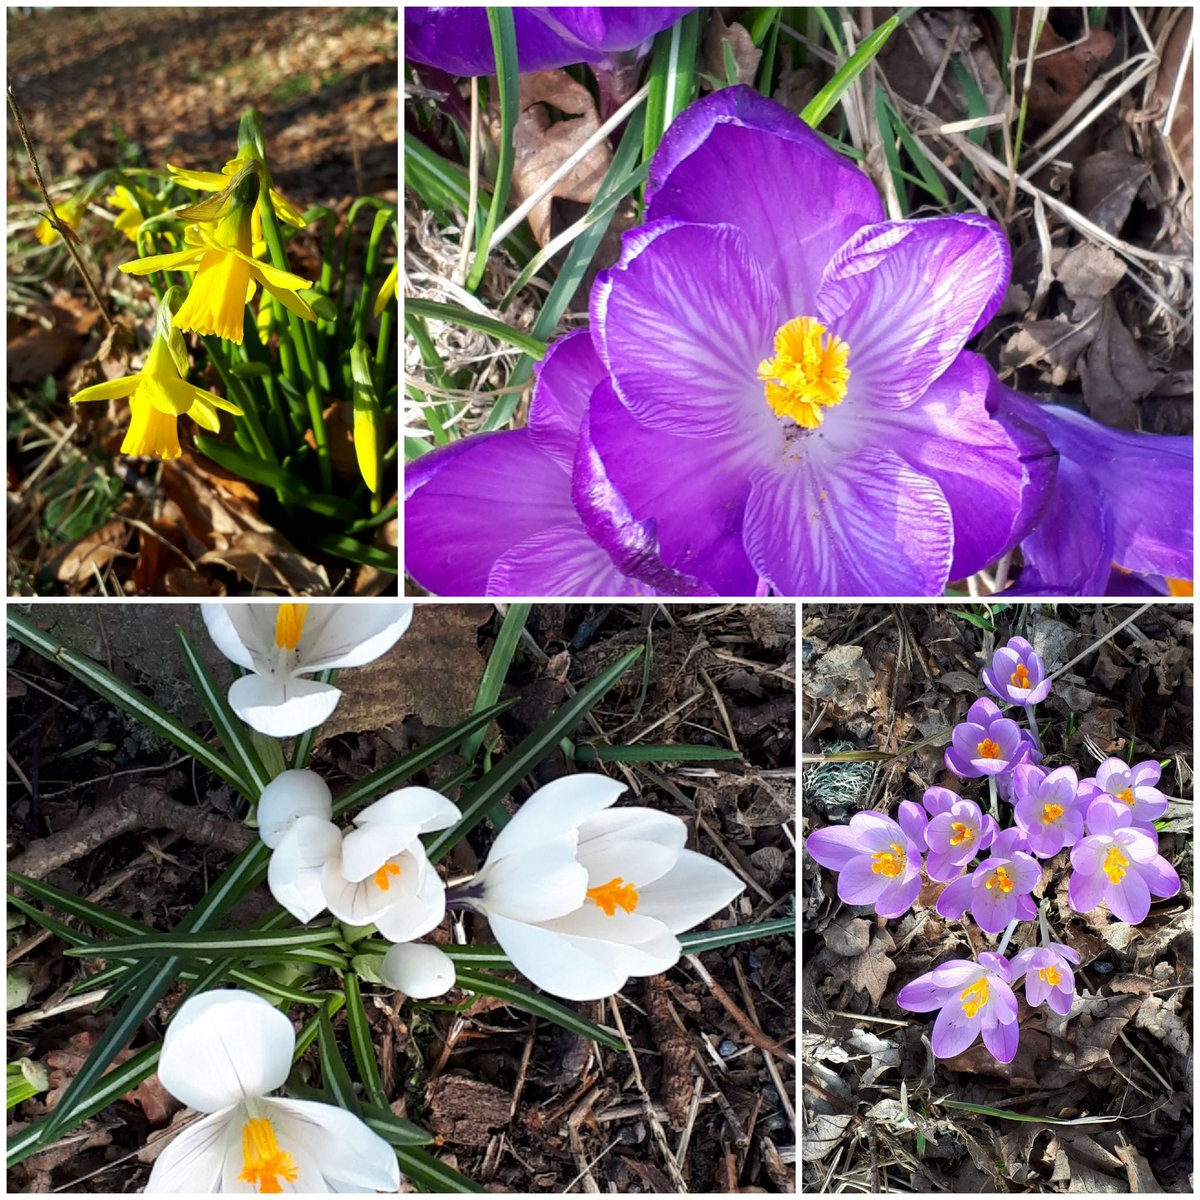 Spring is springing on my #lunchtimewalk